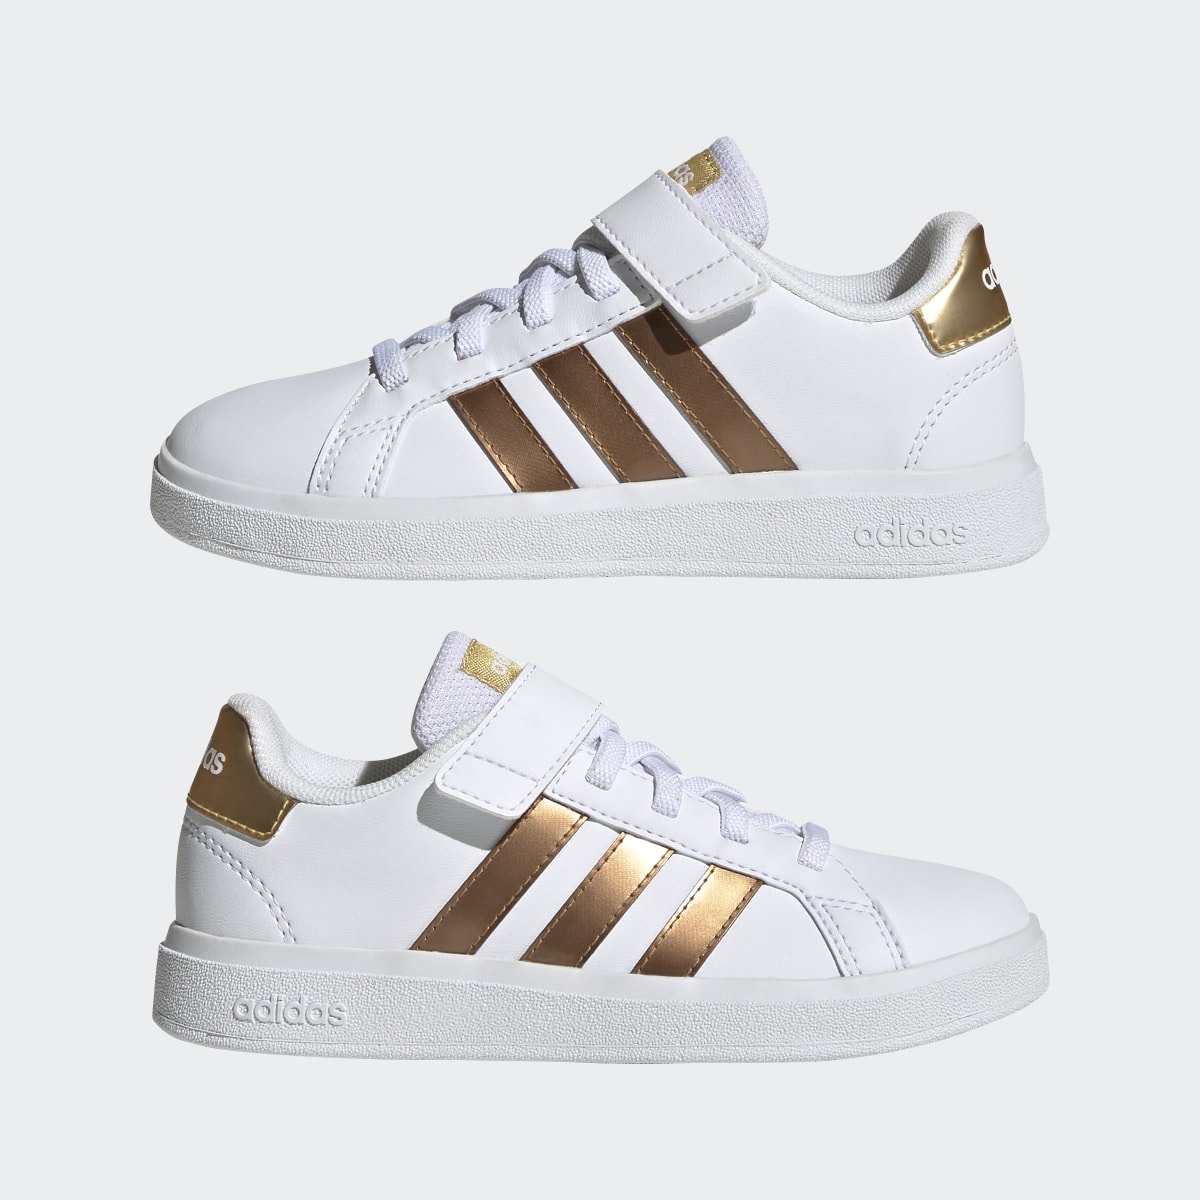 Adidas Grand Court Sustainable Elastic Lace and Top Strap Shoes. 8